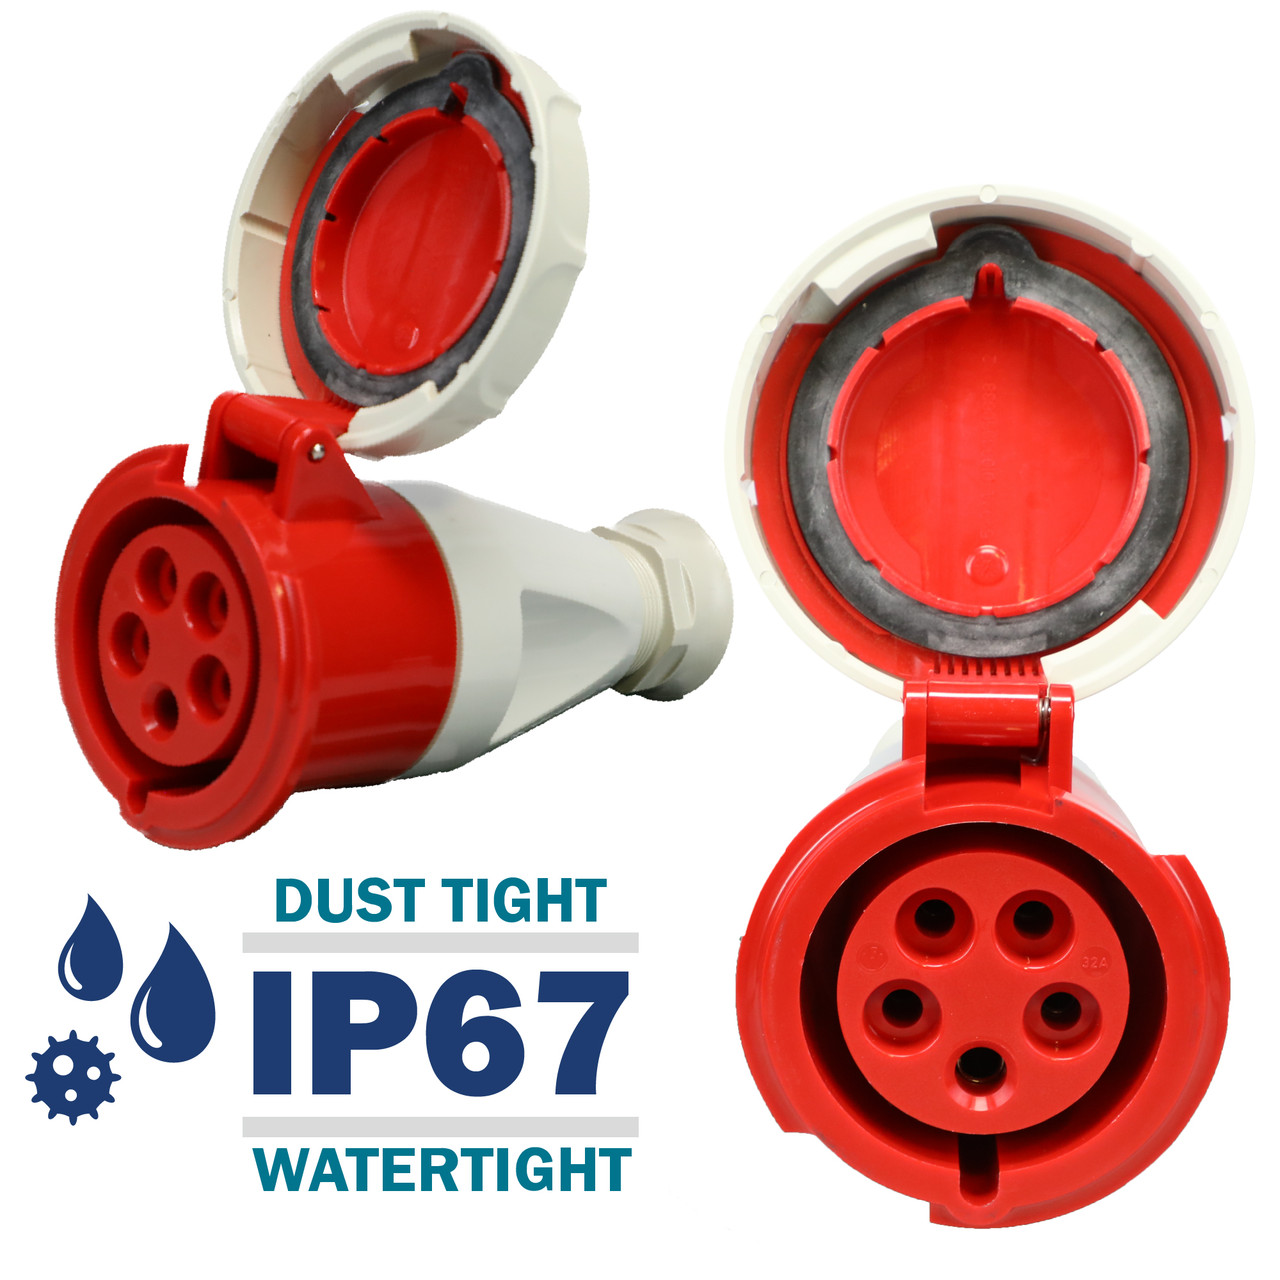 338 Connector carries an environmental rating of IP67 Watertight